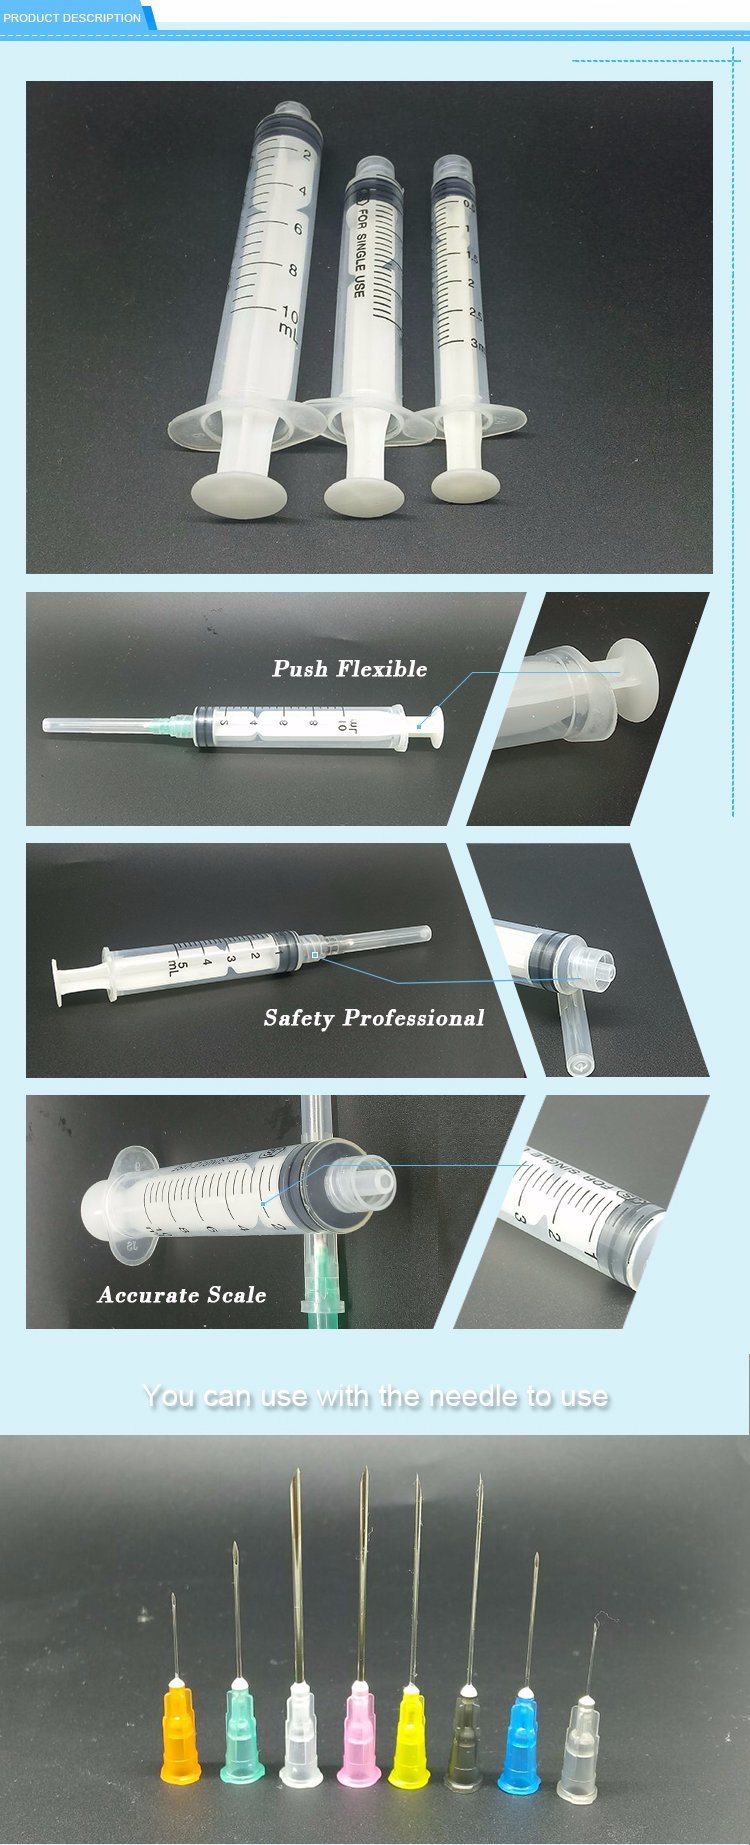 Various Types of Disposable Sterile Syringes for Medical Use